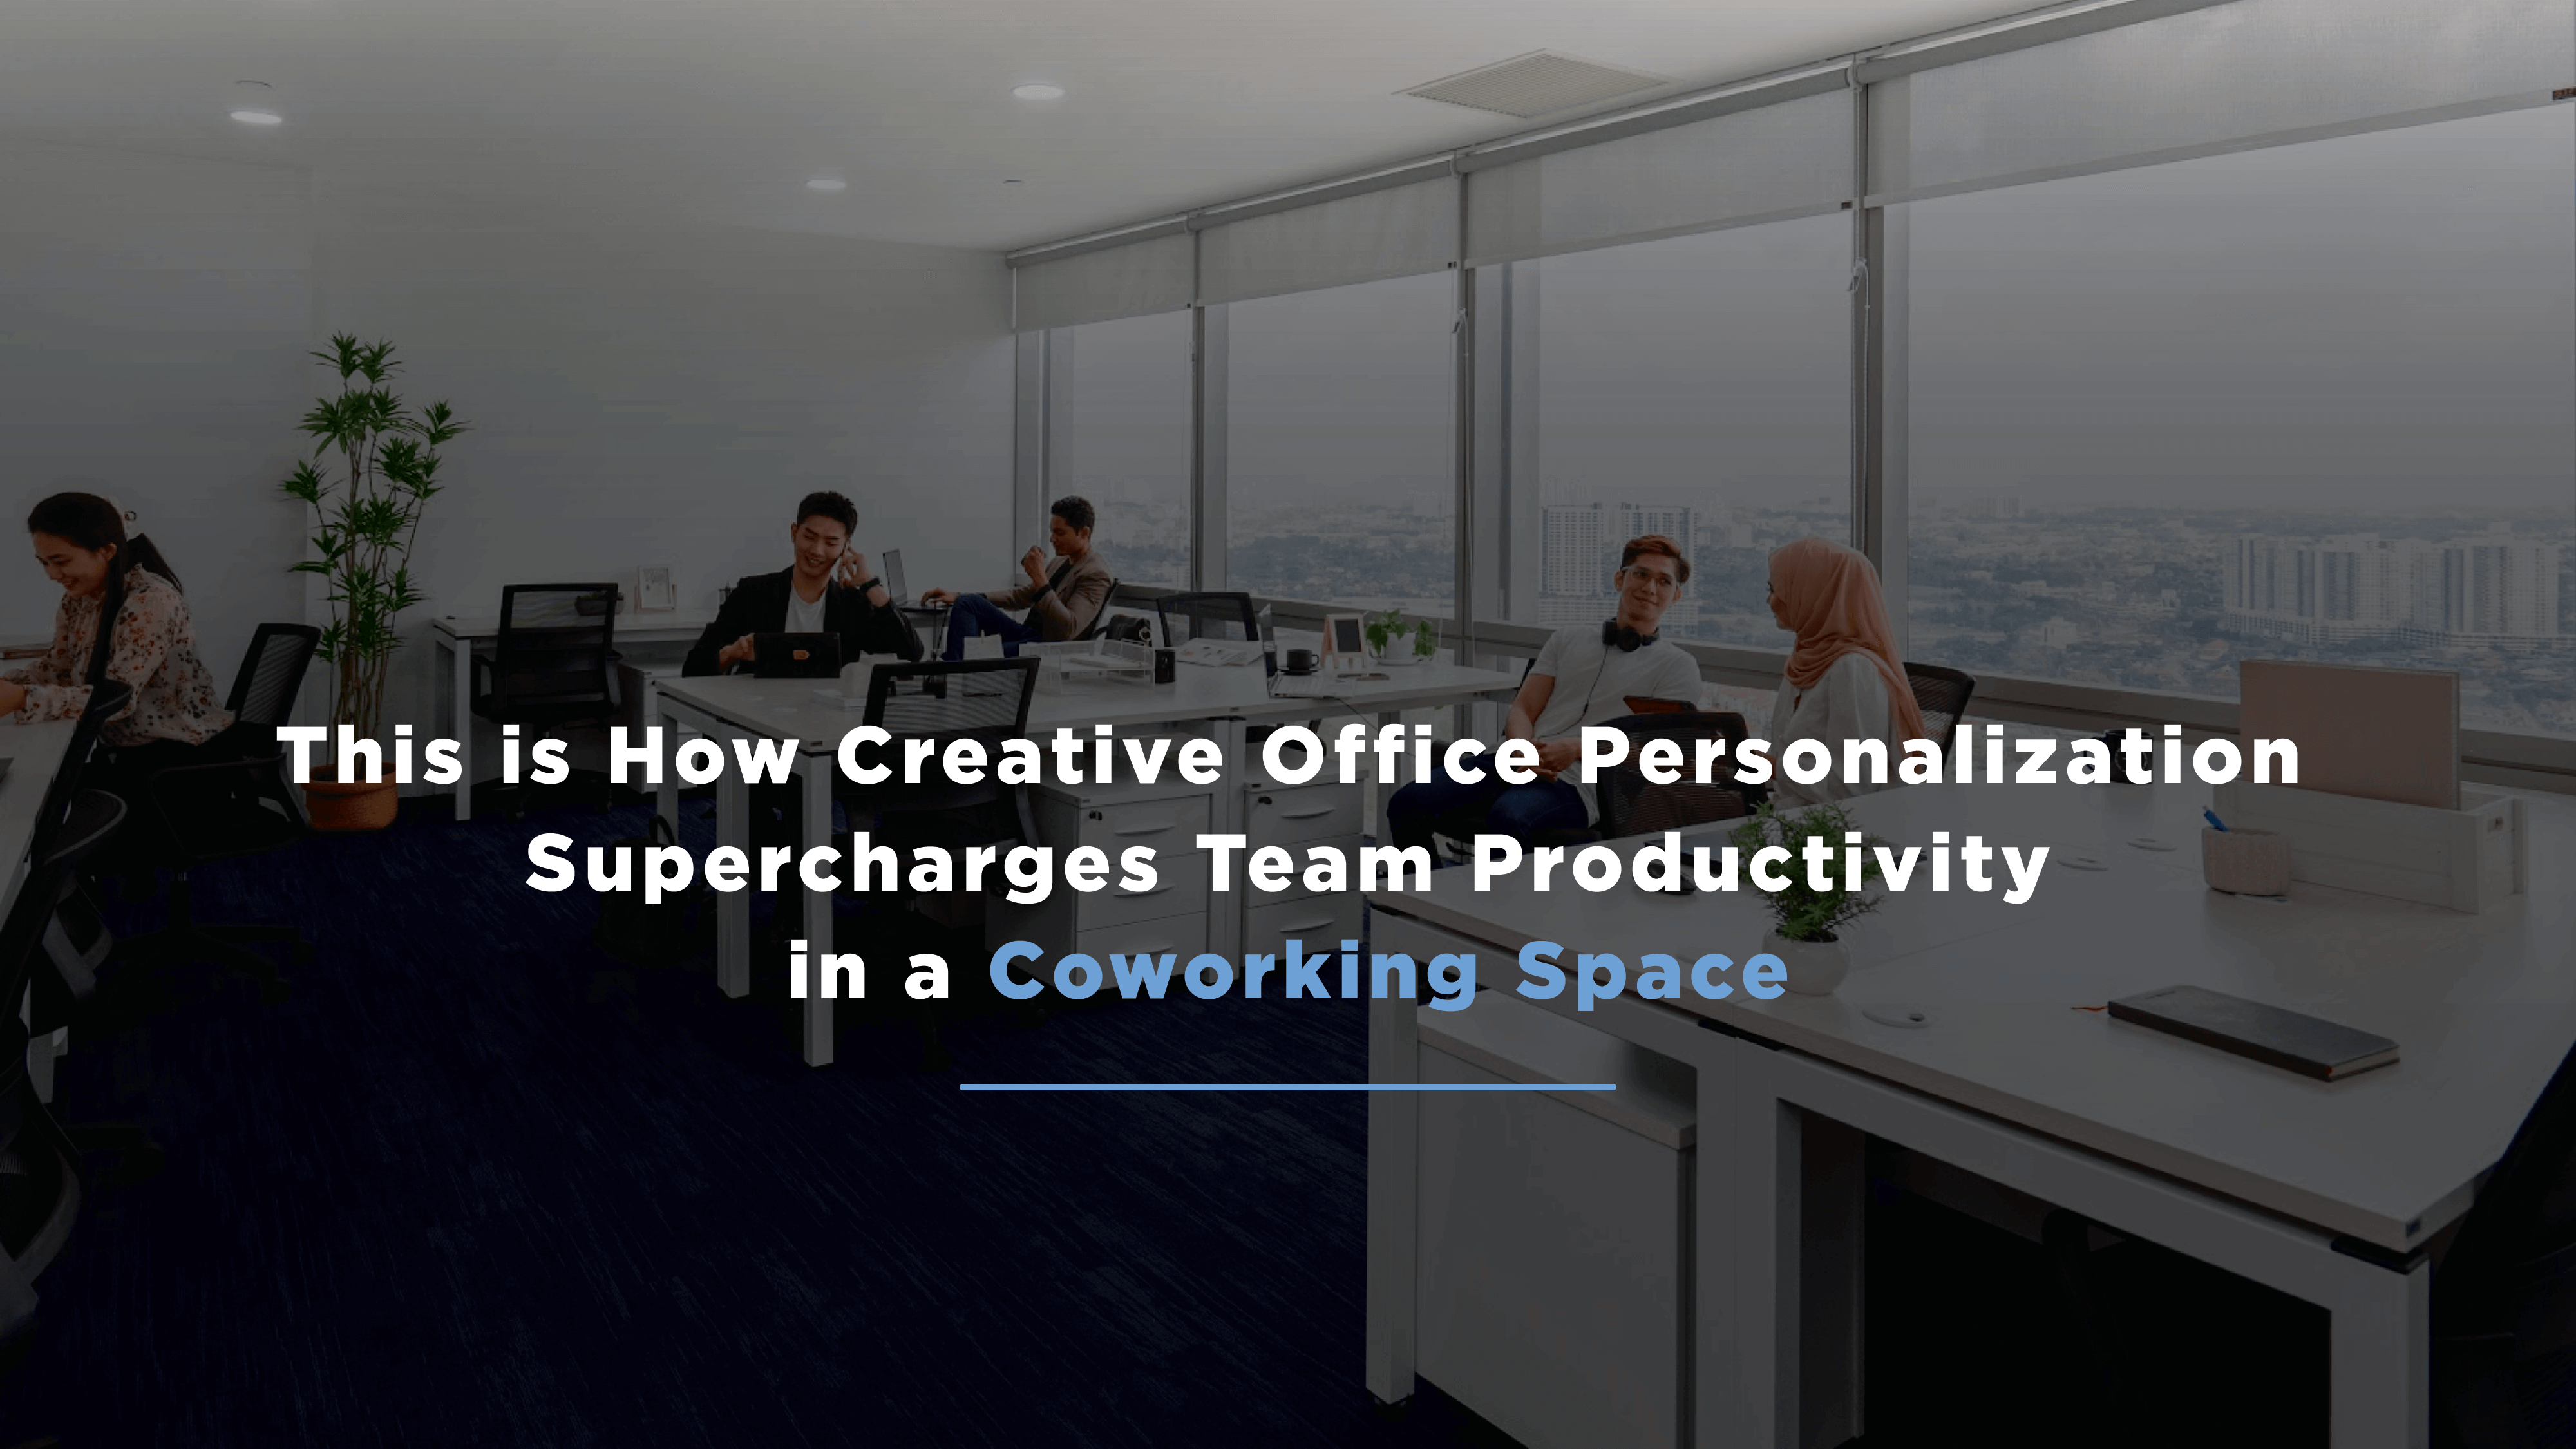 this-is-how-creative office-personalization-supercharges-team-productivity-in-a-coworking-space-aug23